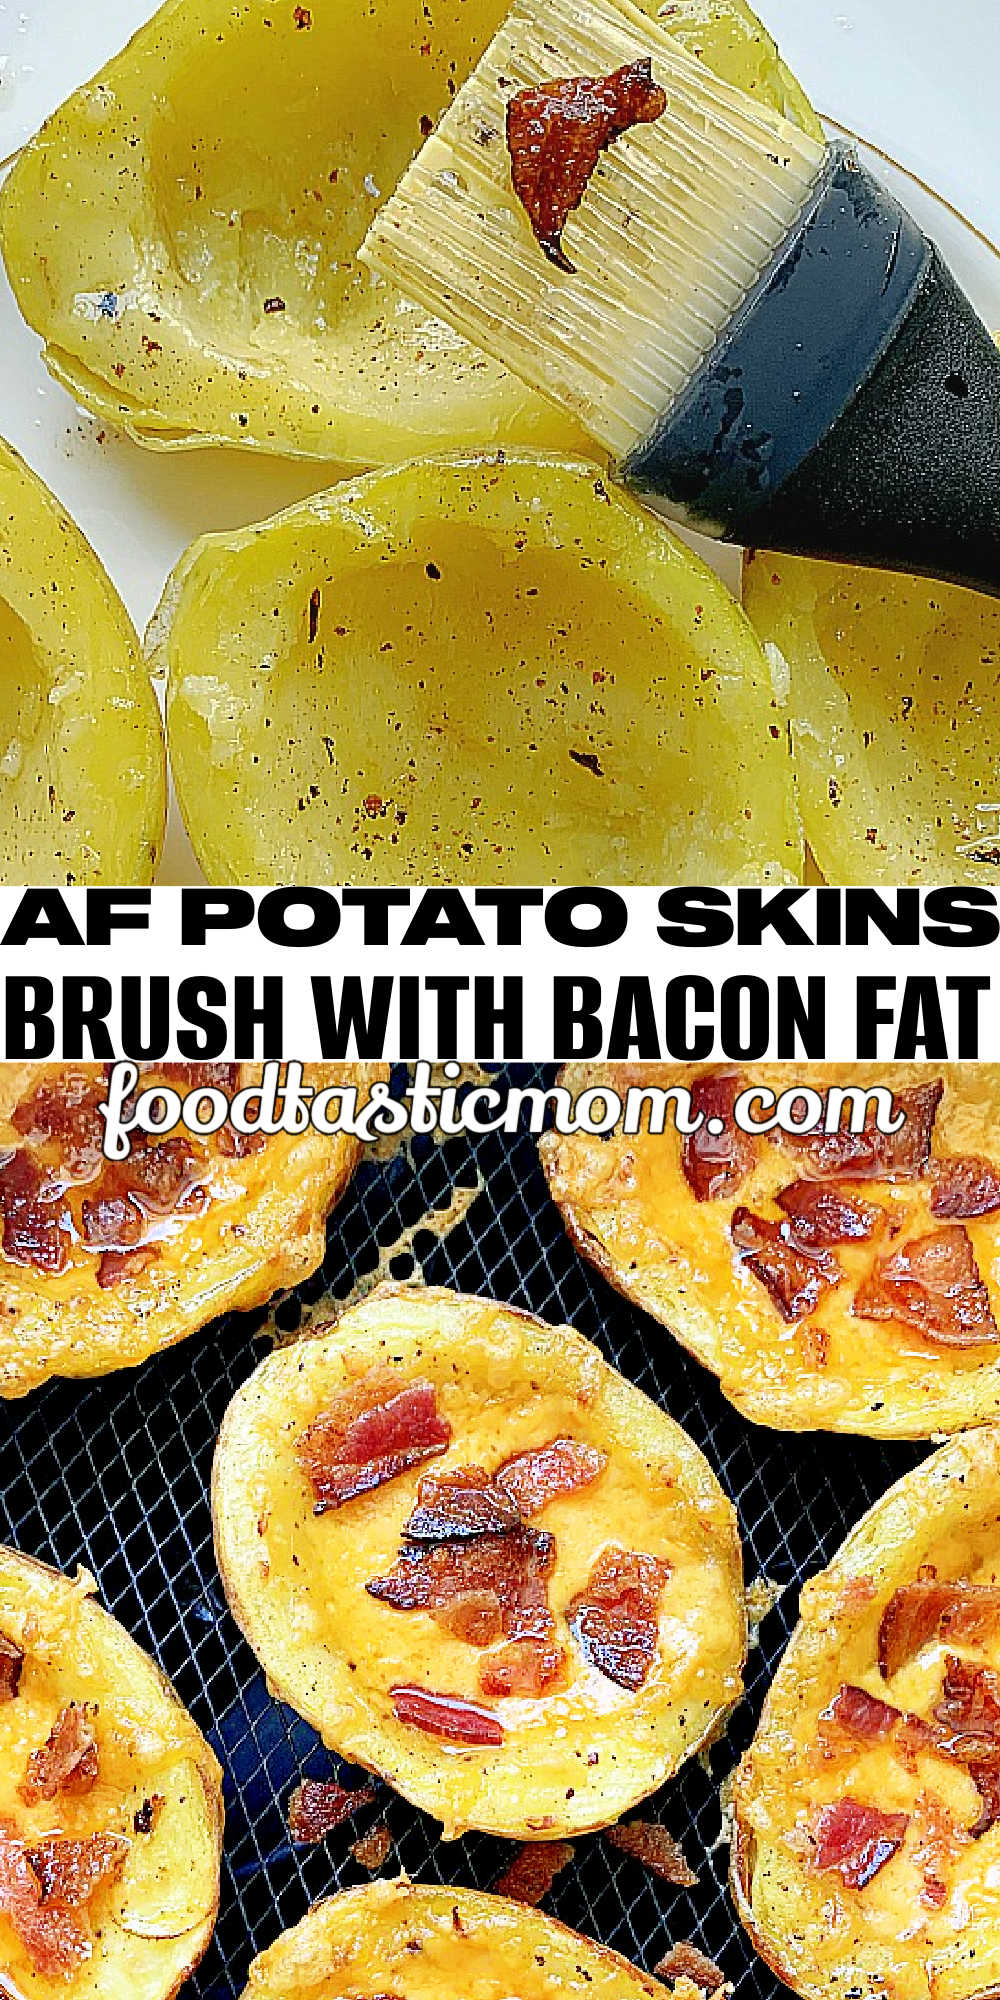 These Air Fryer Potato Skins are even better than restaurant skins. Start in the microwave and brush with bacon fat - then the air fryer makes them perfect! via @foodtasticmom